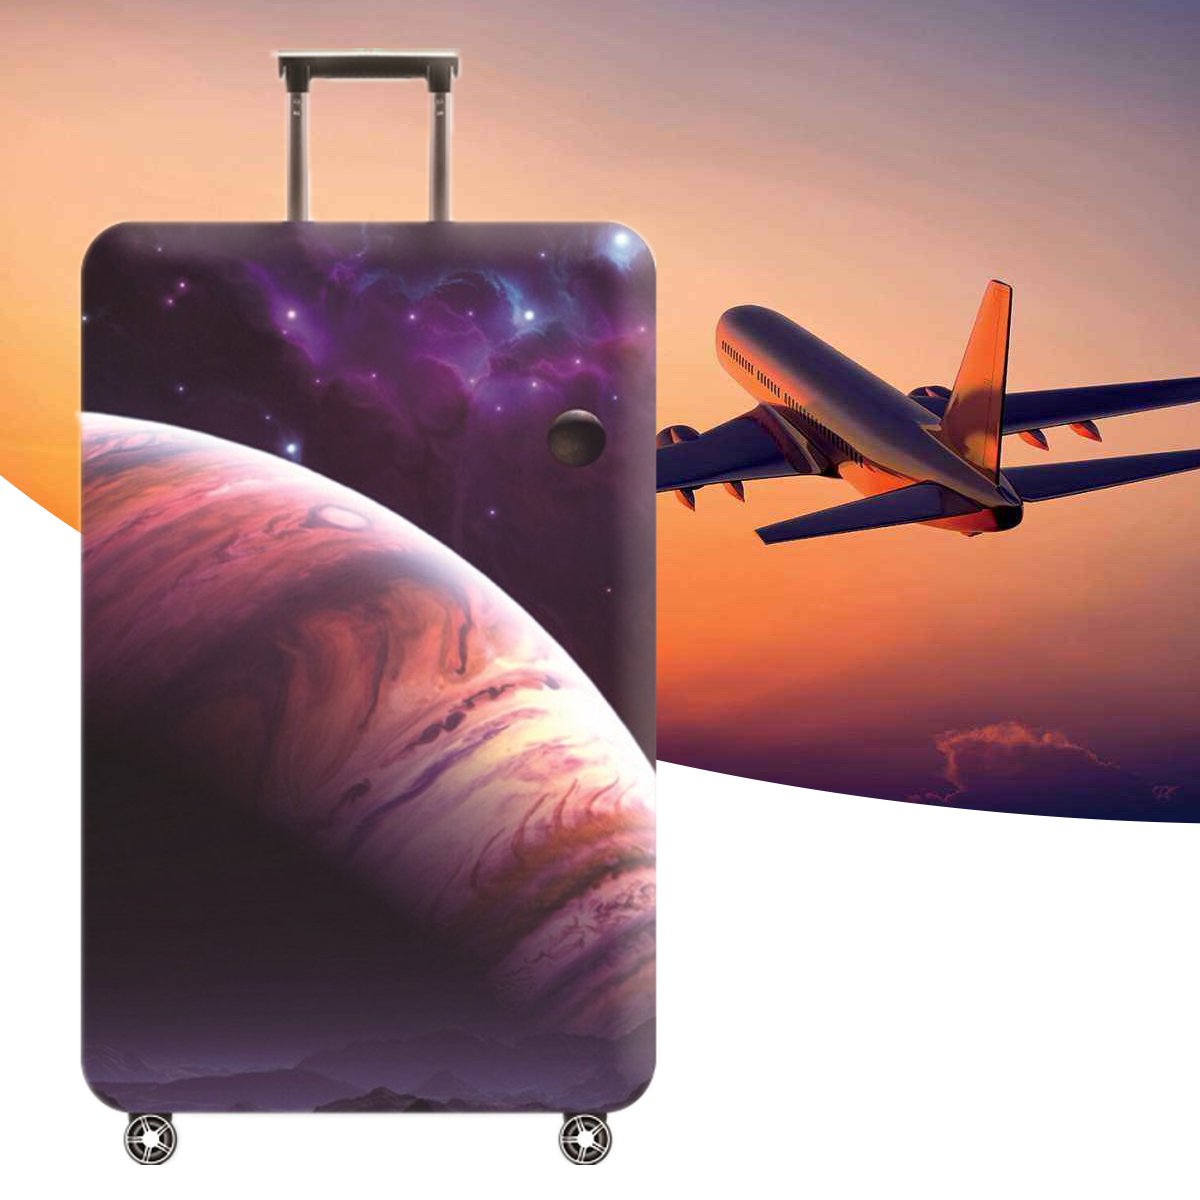 Multicolors-Elastic-Luggage-Cover-Travel-Suitcase-Protector-Dustproof-Protection-Trolley-Case-1465419-9